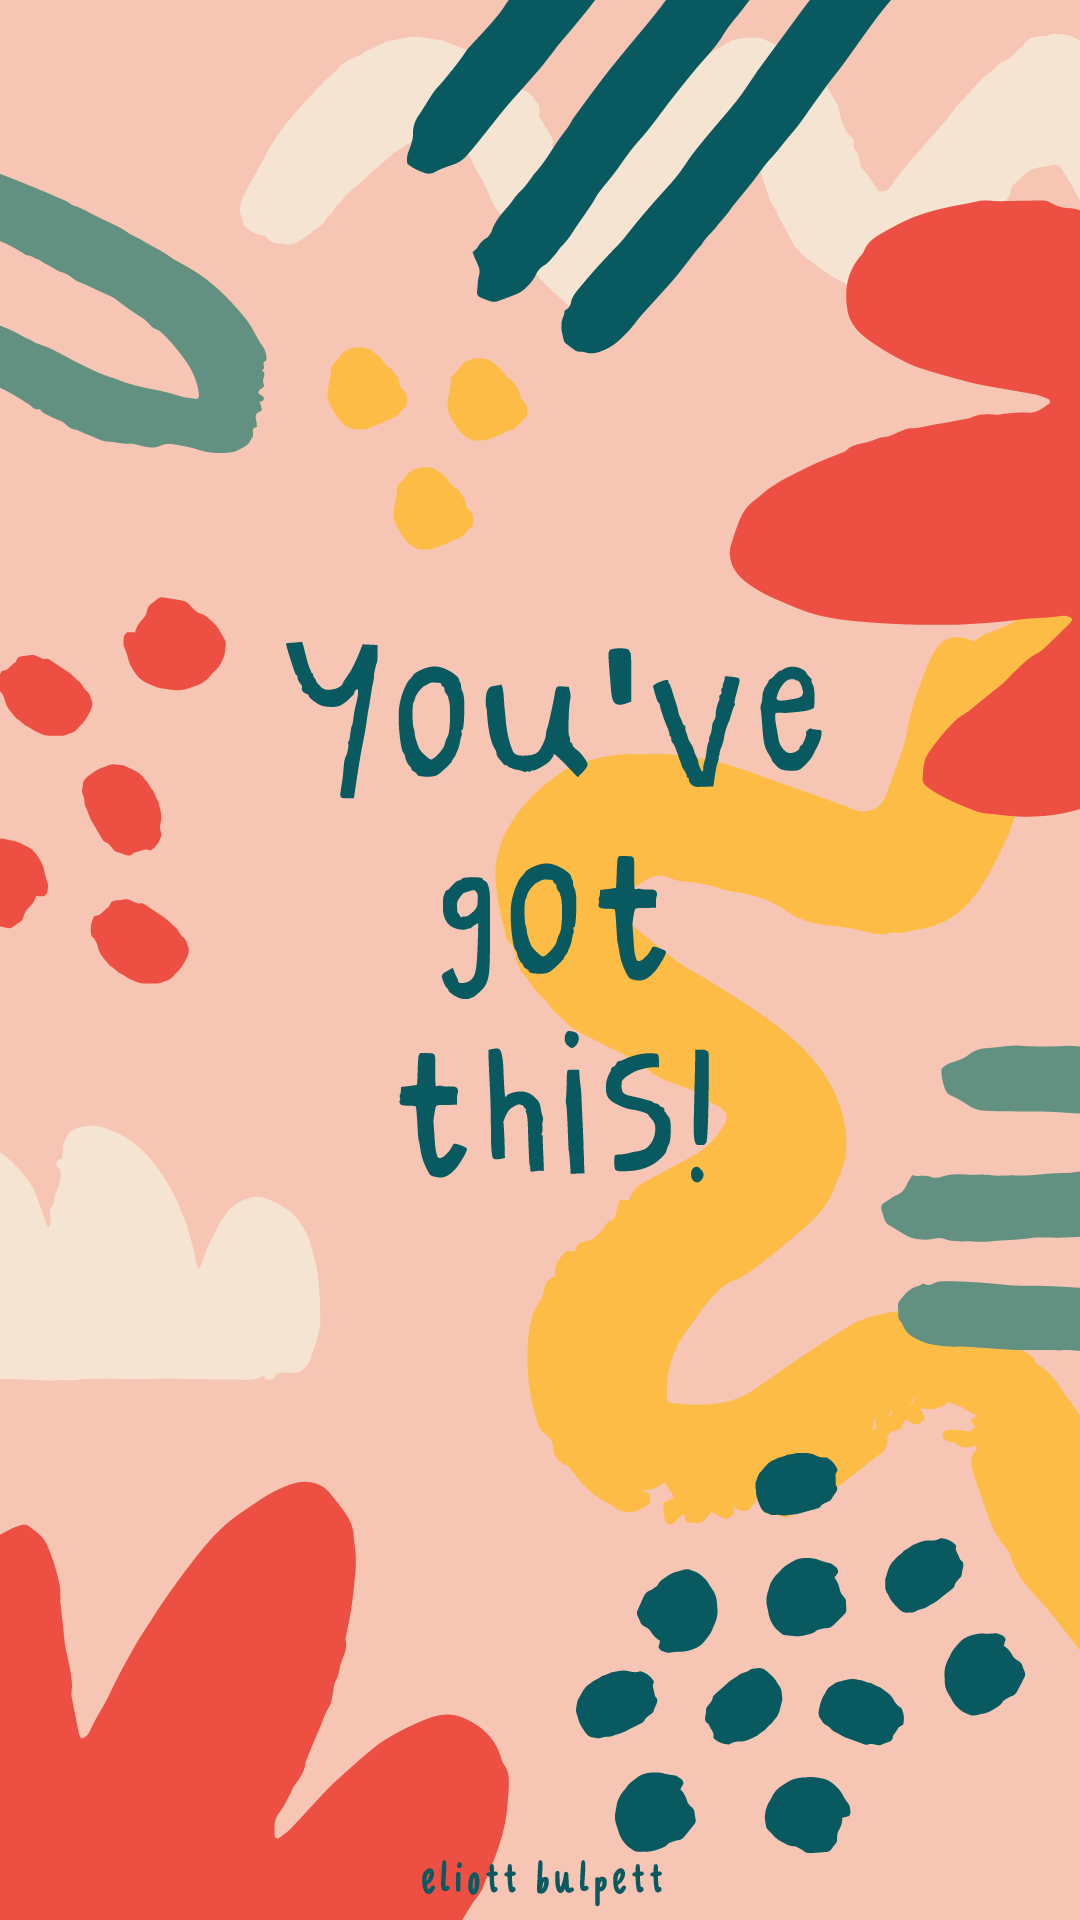 You've got this quote poster - Positivity, motivational